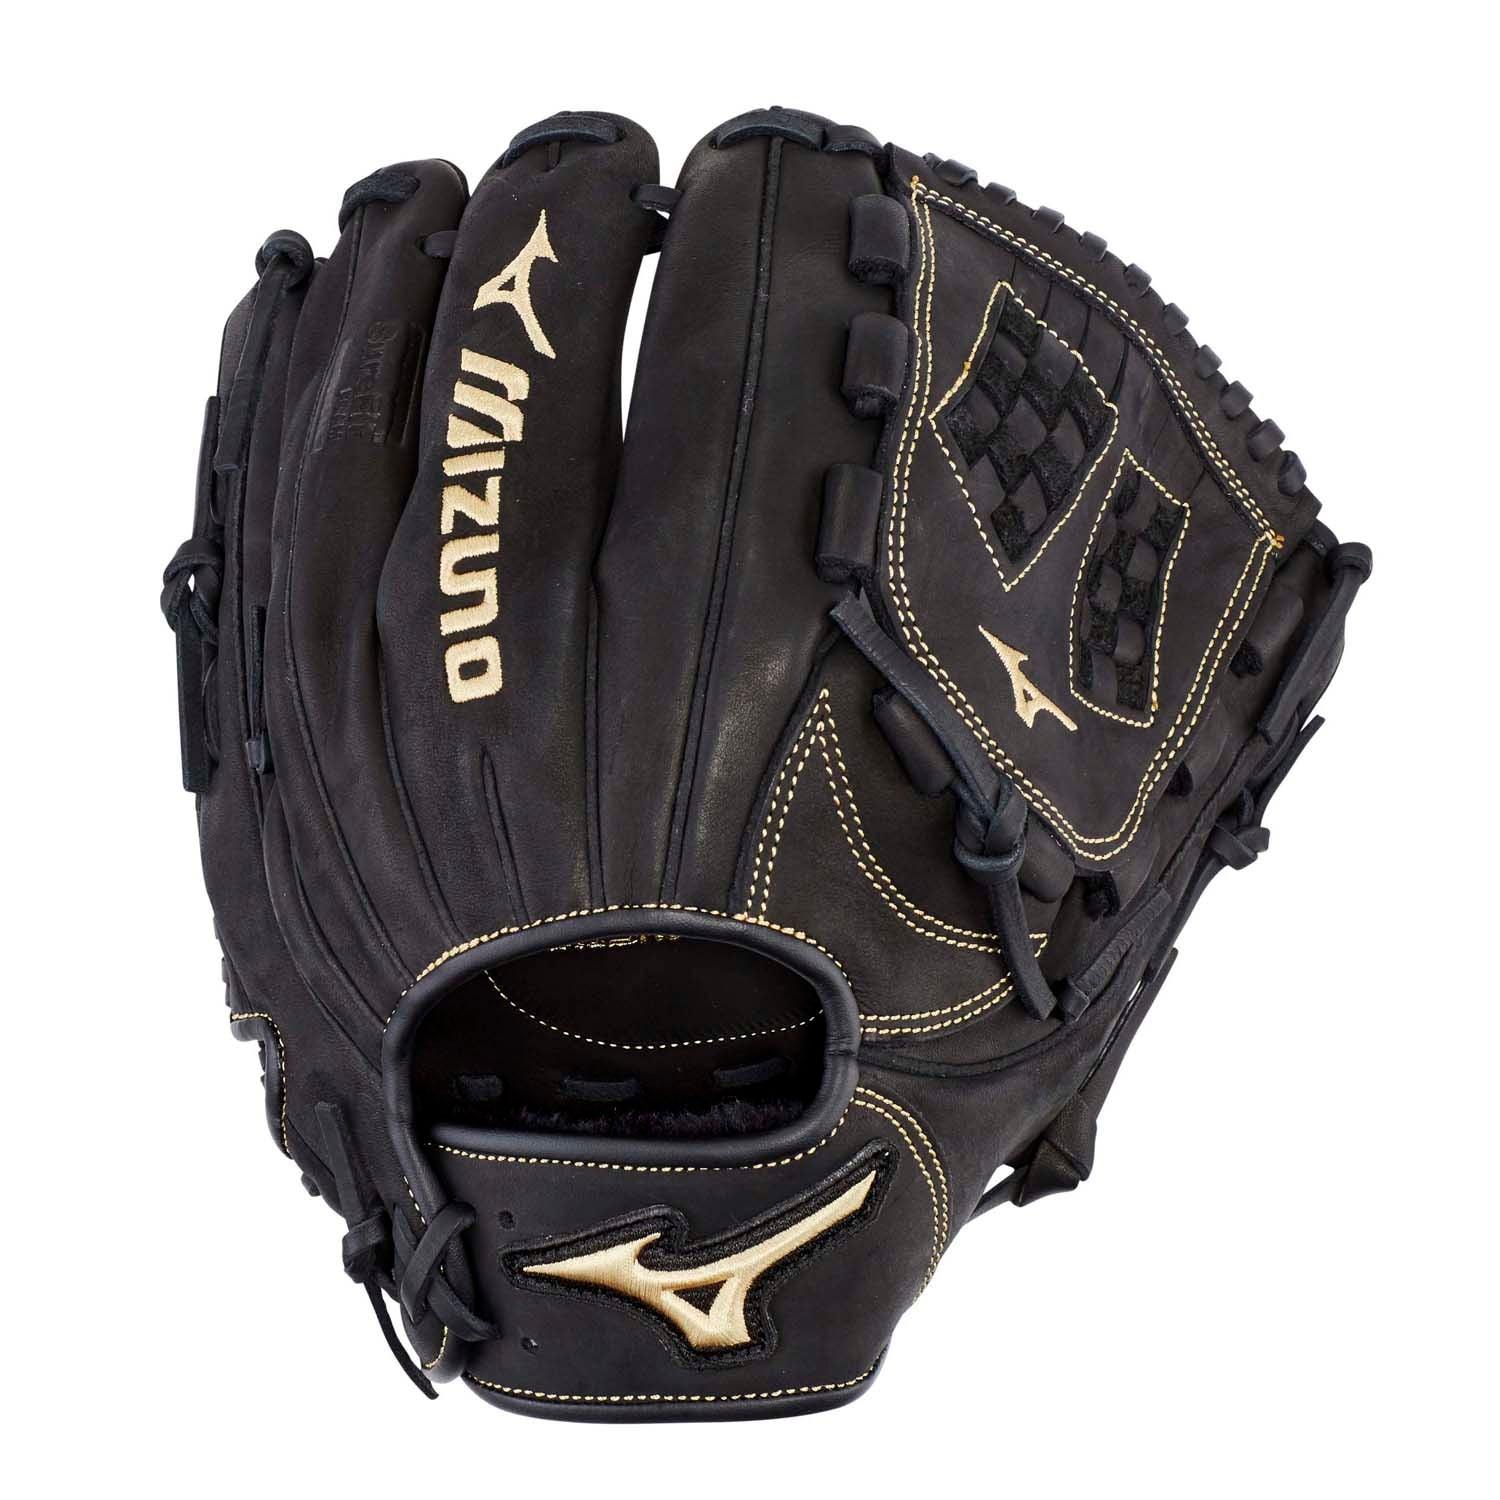 MVP Prime Fastpitch Softball Glove 12" - Sports Excellence